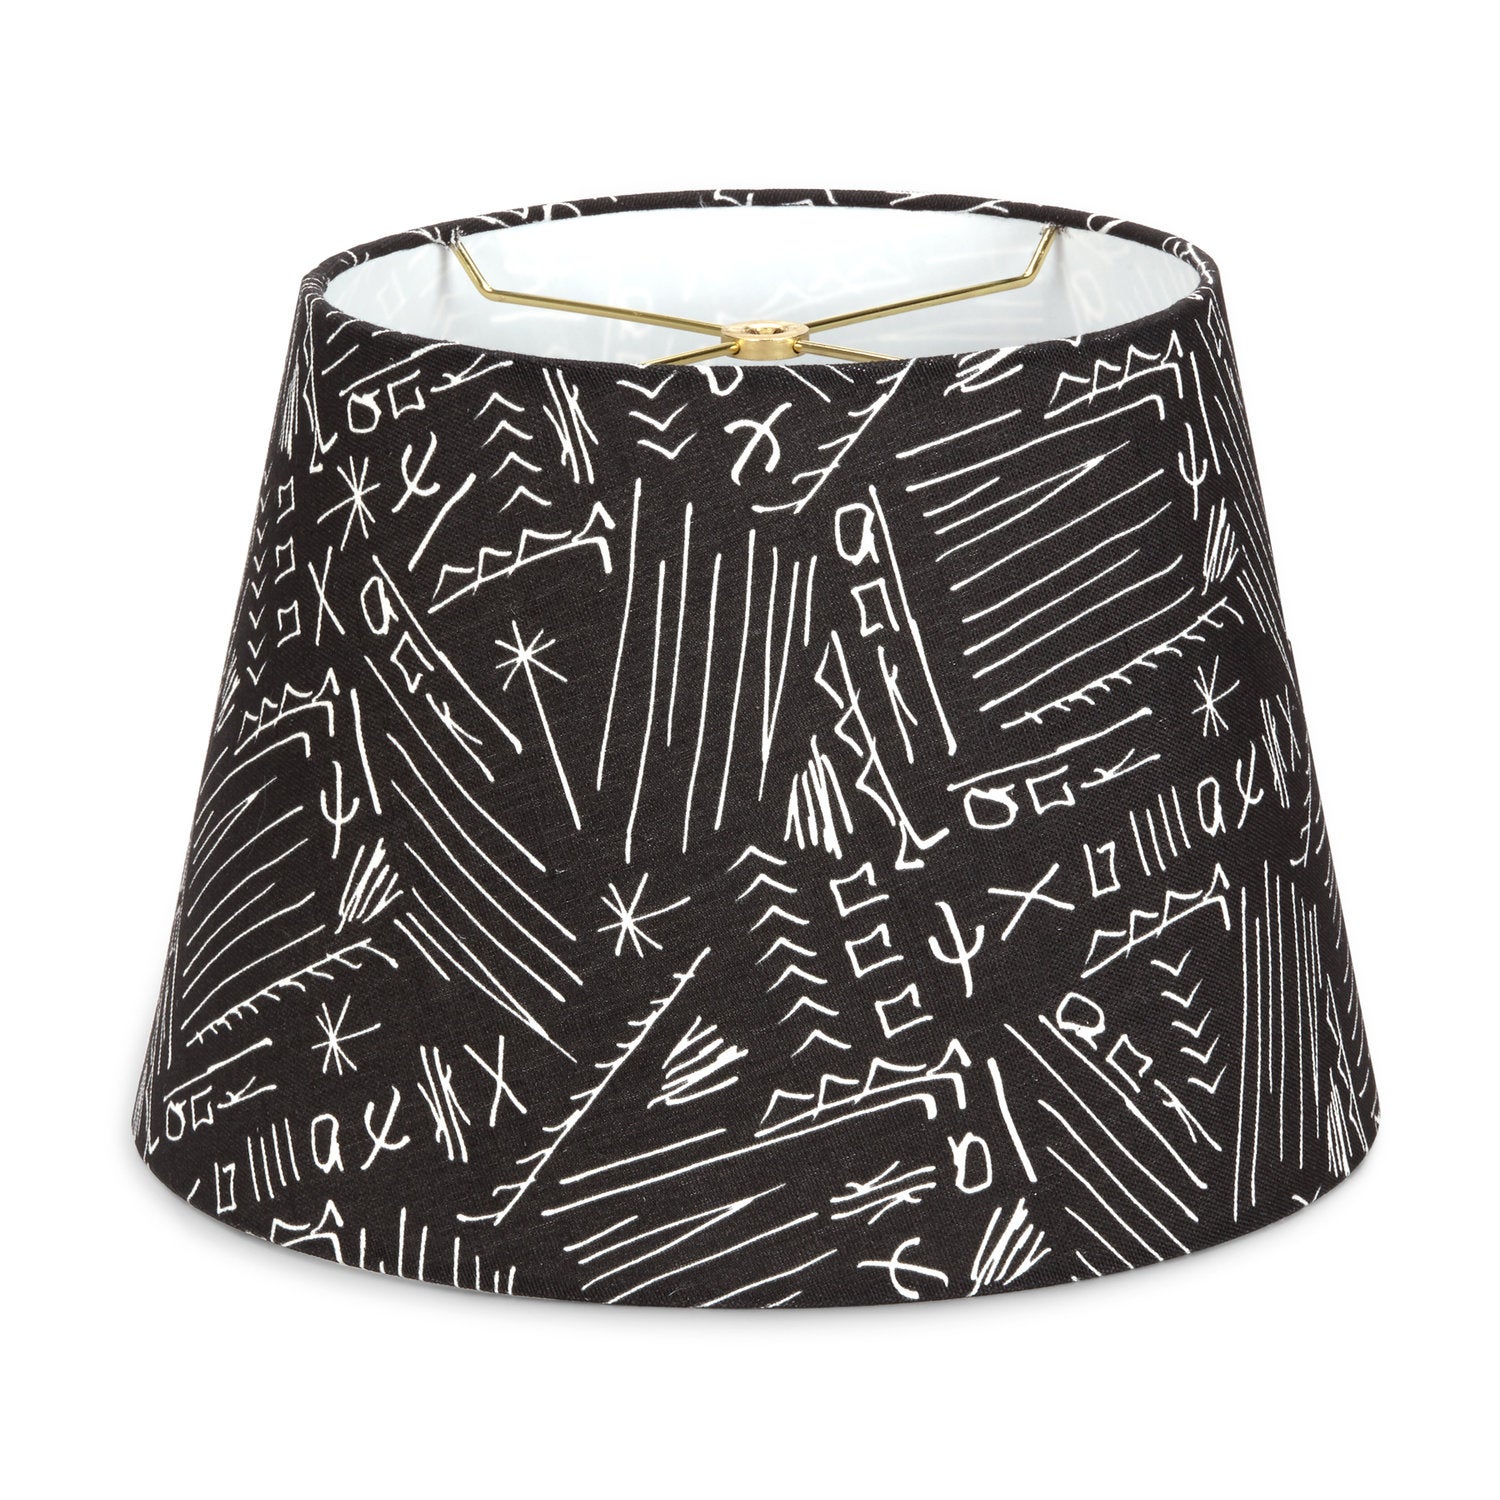 Black and white lampshade